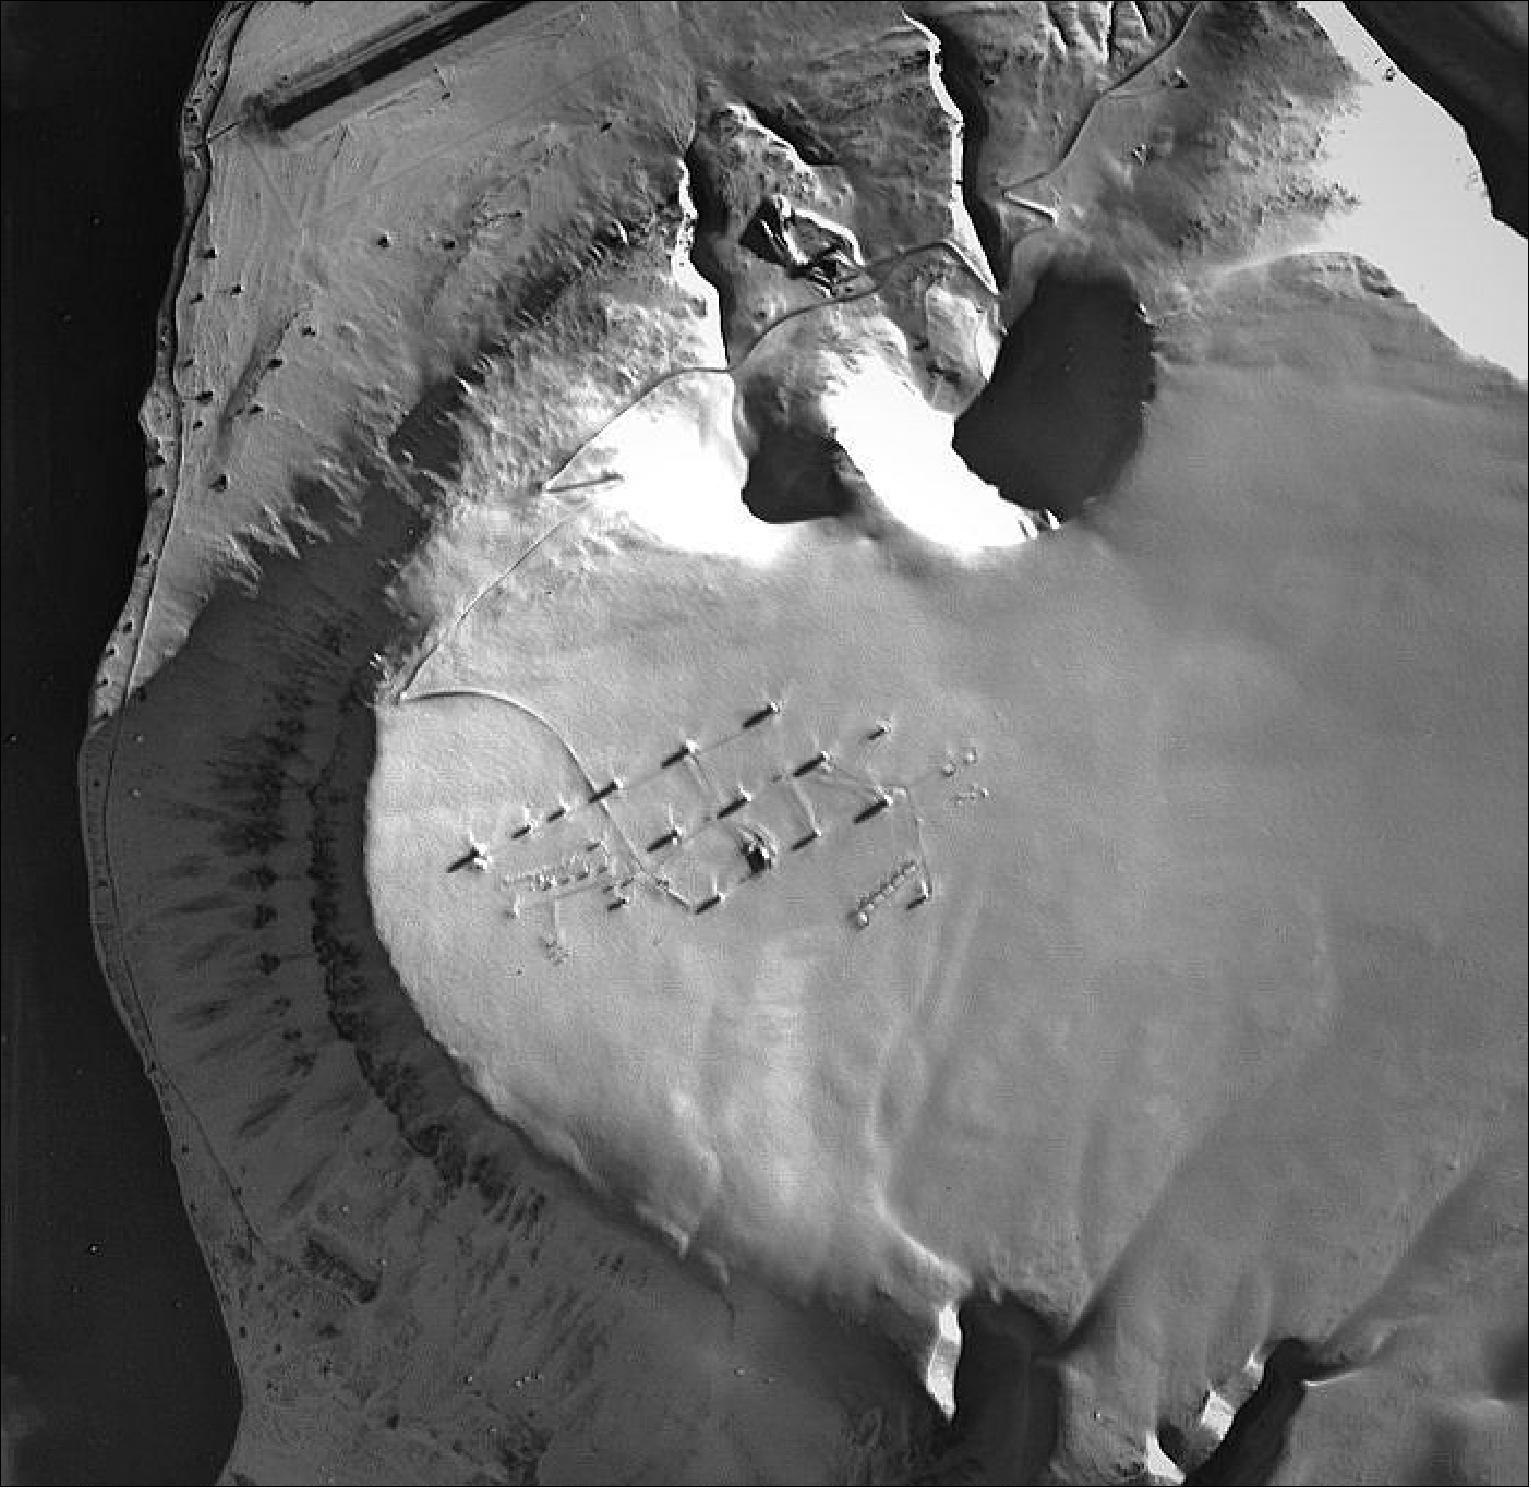 Figure 16: This HRC image of PROBA-1 was acquired on April 16, 2016. Long shadows cast across the snow give a frosty view of the covered domes of Europe’s most northerly ground station, as seen by the smallest camera on ESA’s veteran PROBA-1 minisatellite. Note the slice of airstrip, cleared of snow, on the left side at the very top of the image (image credit: ESA)